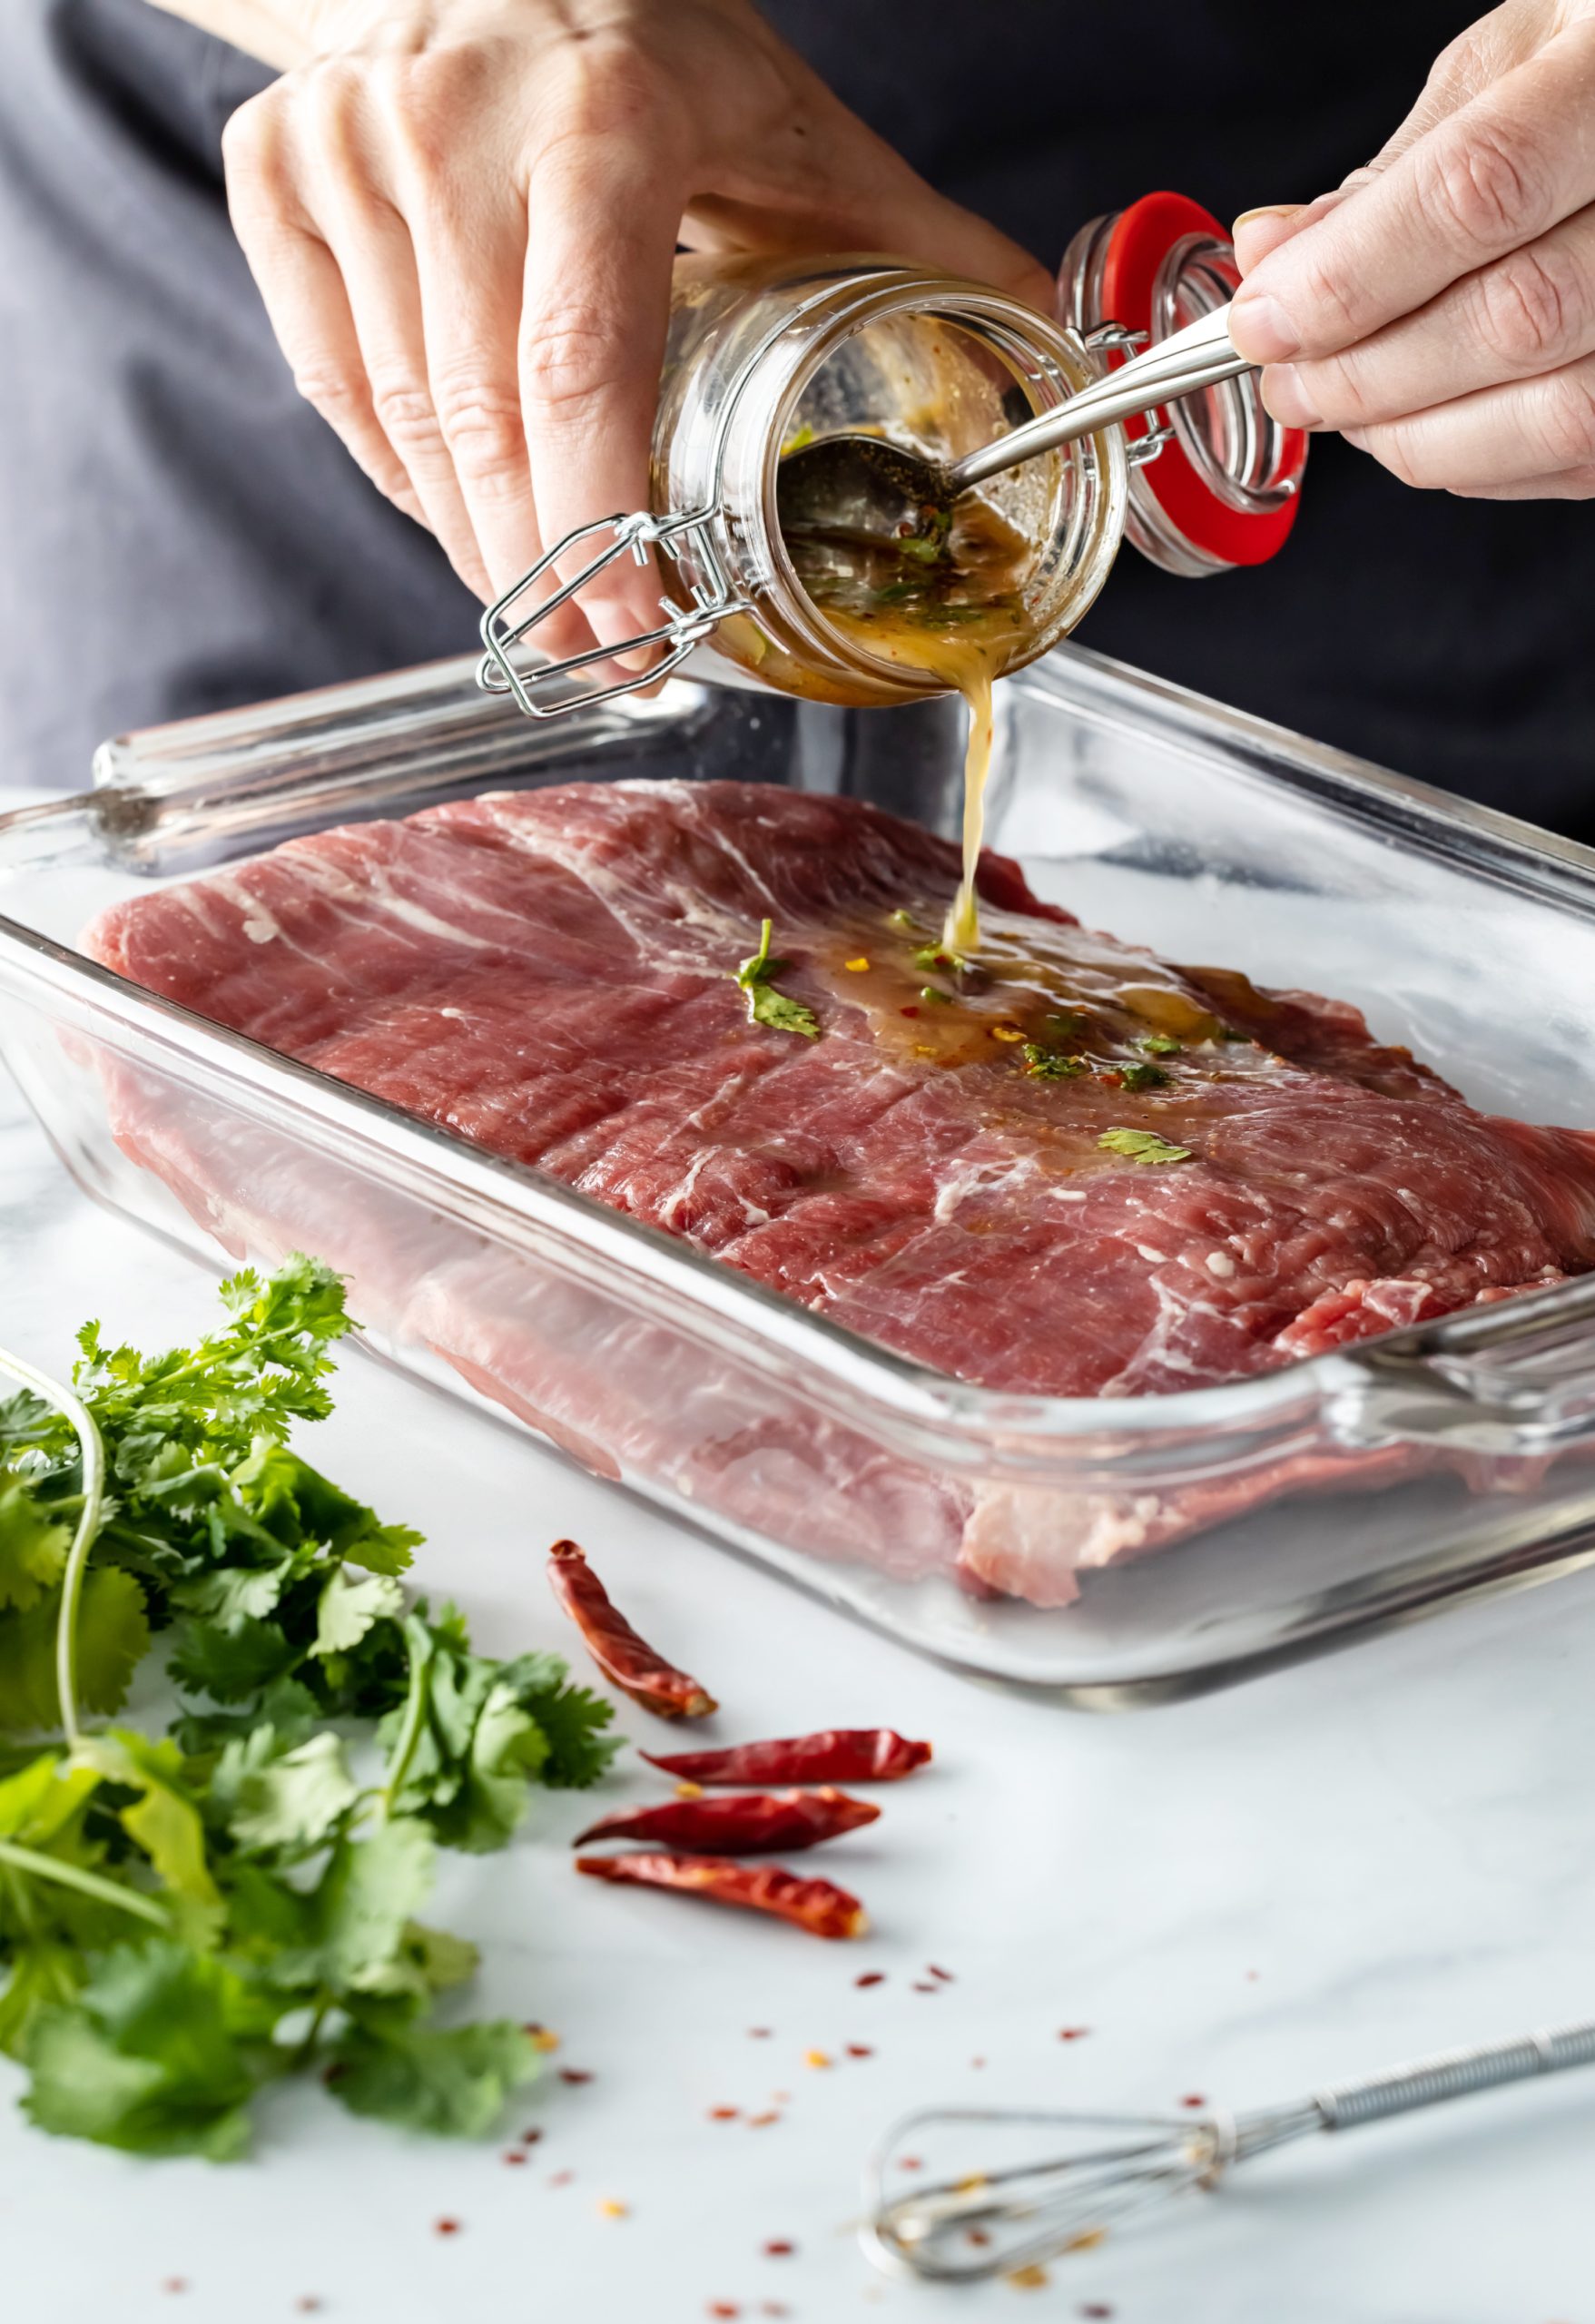 A person tenderizing and drizzling sauce on a piece of meat.